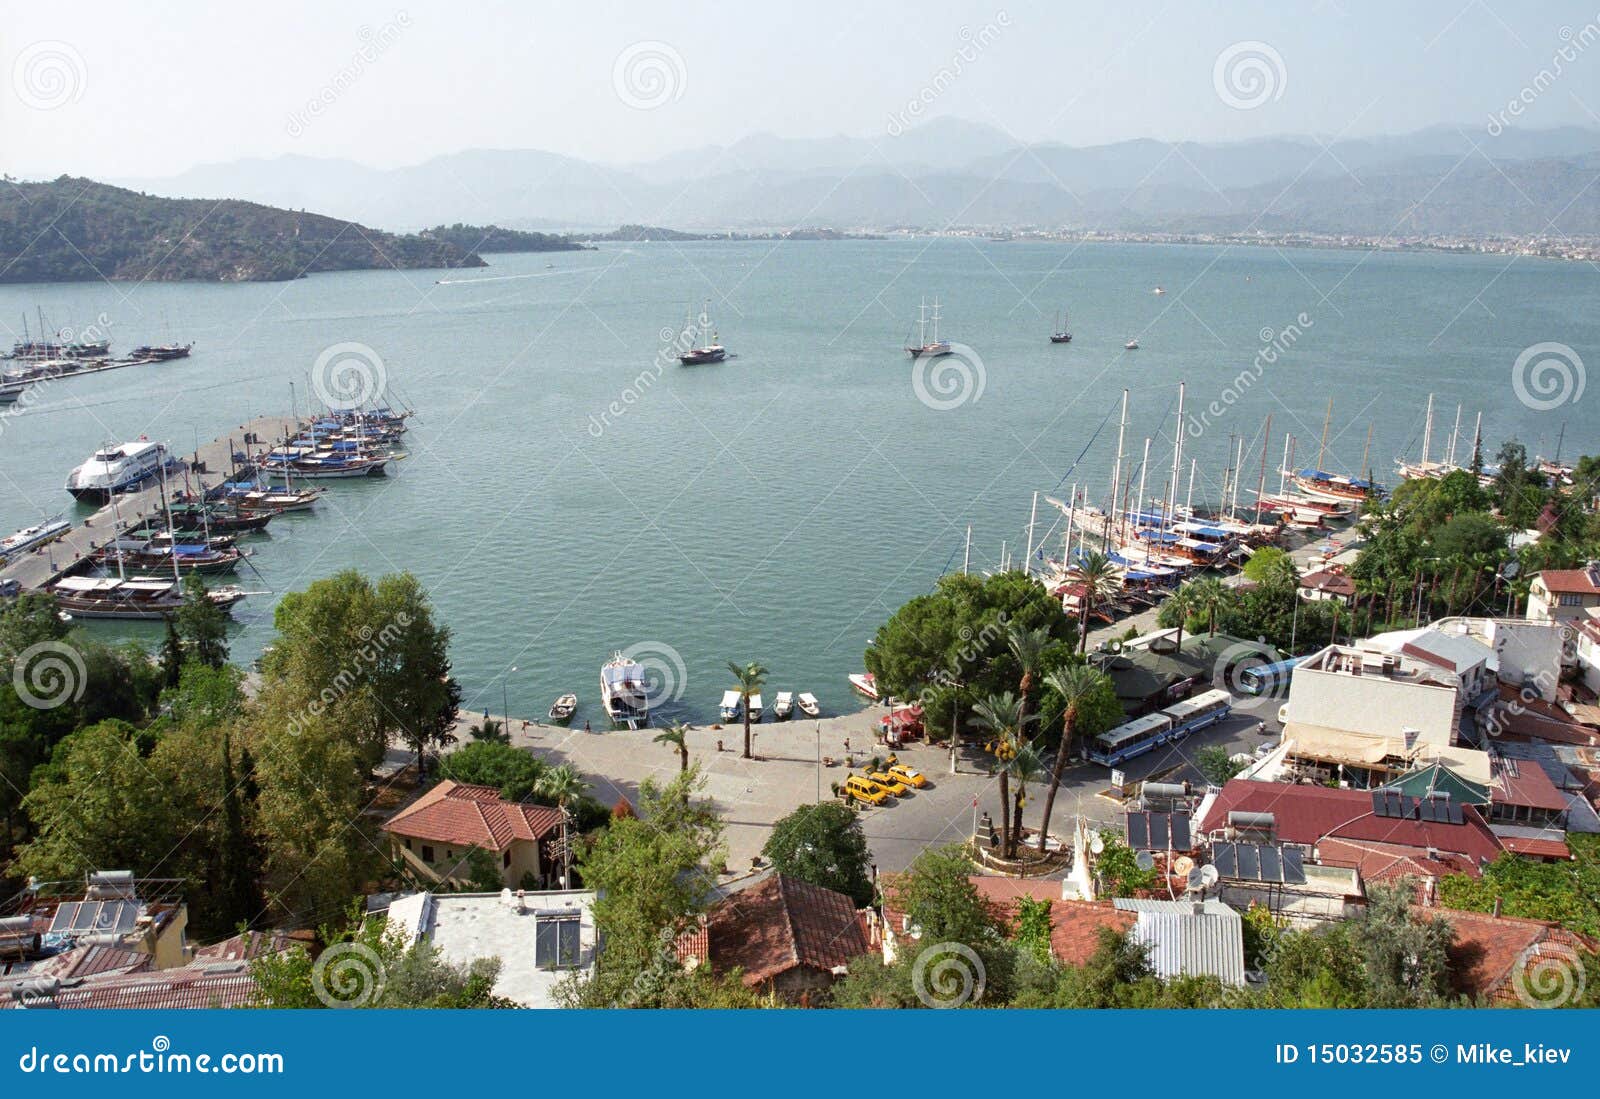 fethiye town view